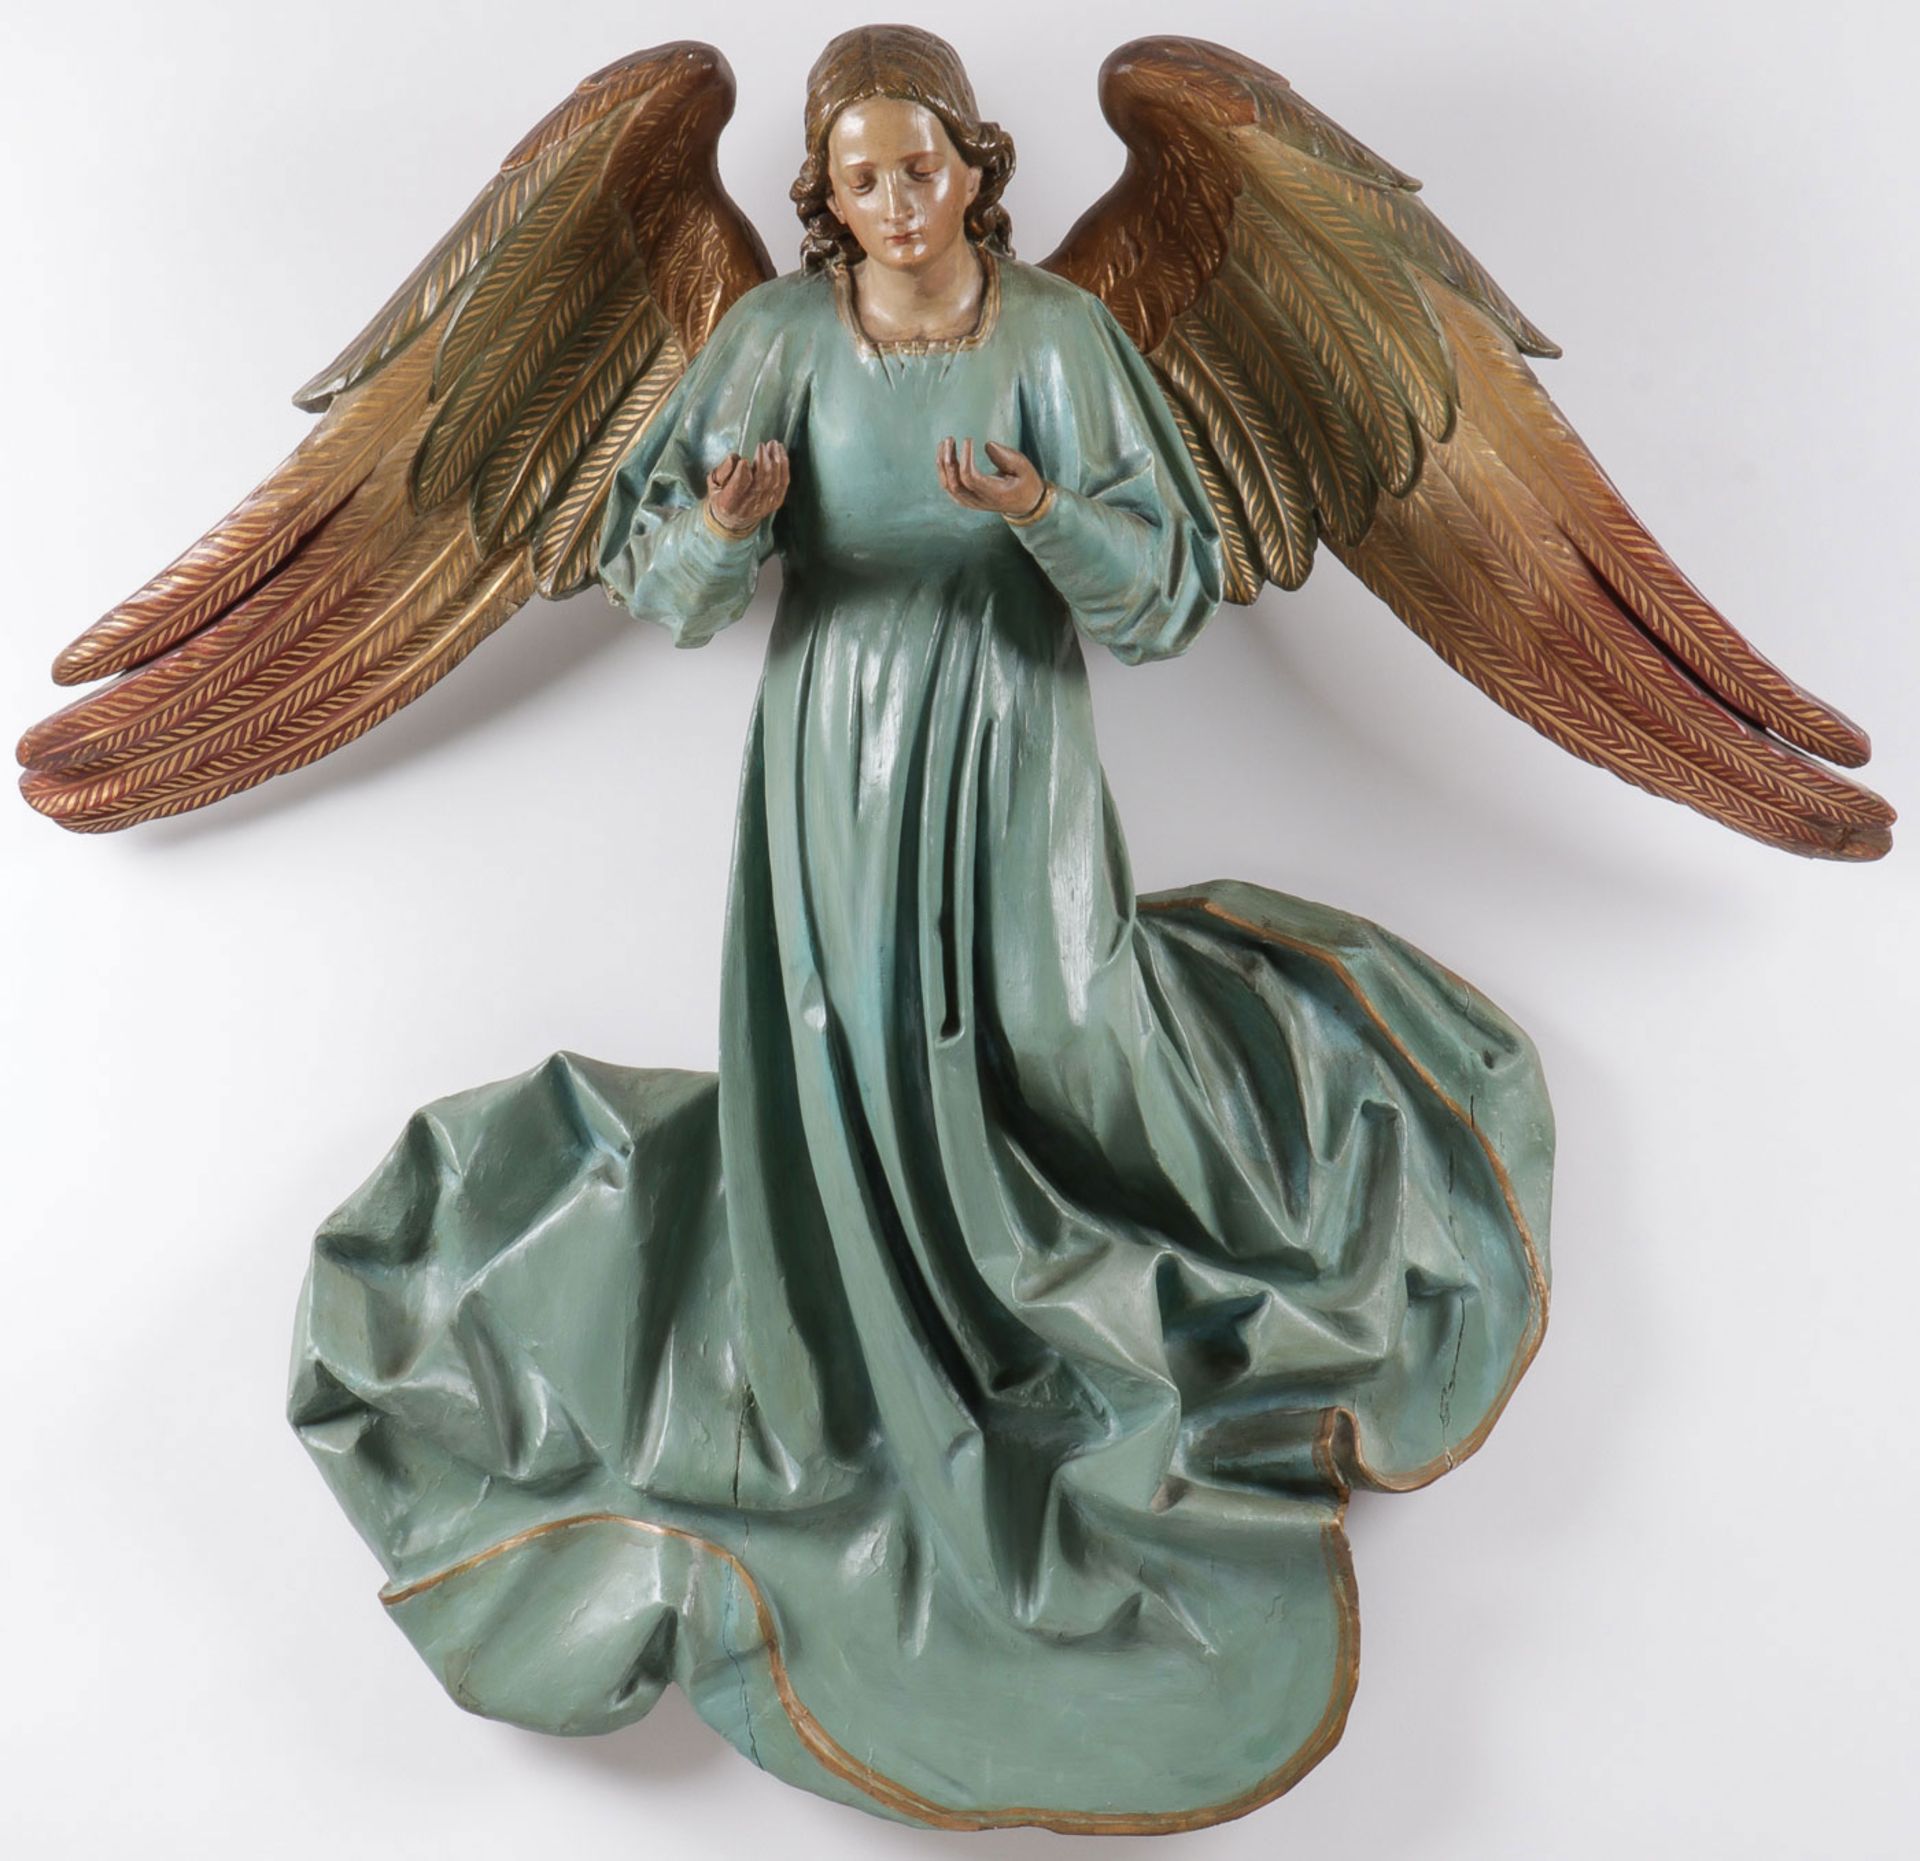 SPECTACULAR LARGE CARVED WOOD ANGEL, 19TH C